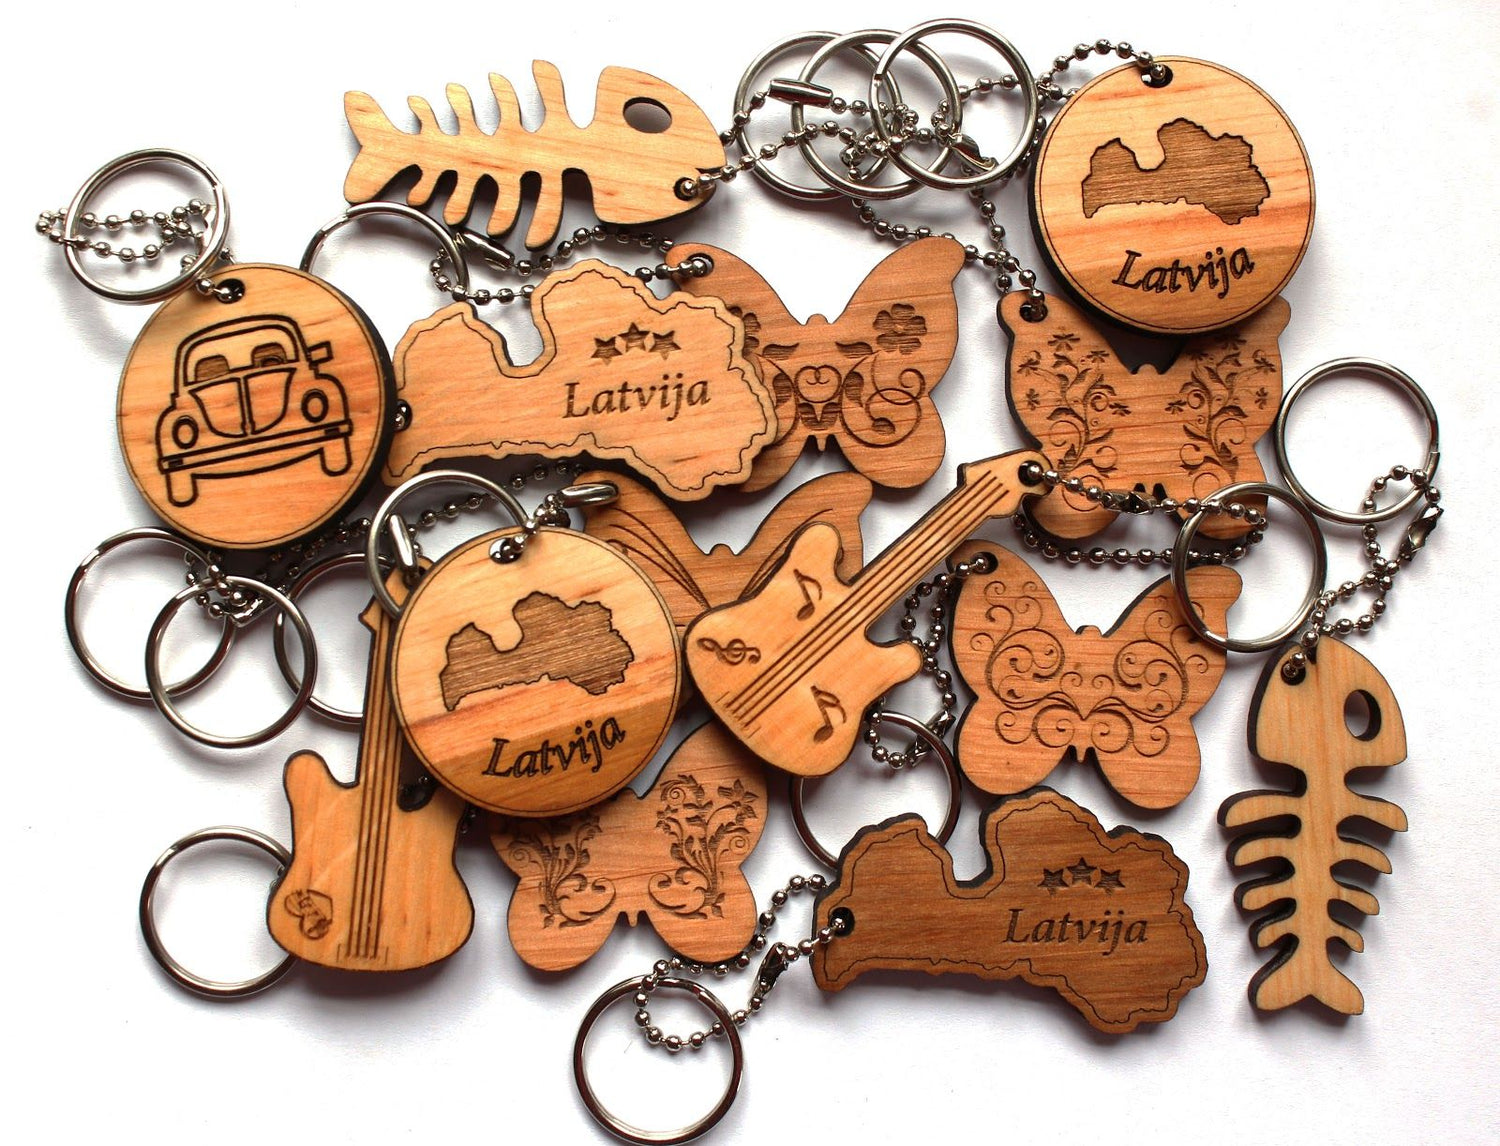 Commonly Used Materials of Laser Engraver and Engraving Technology Methods